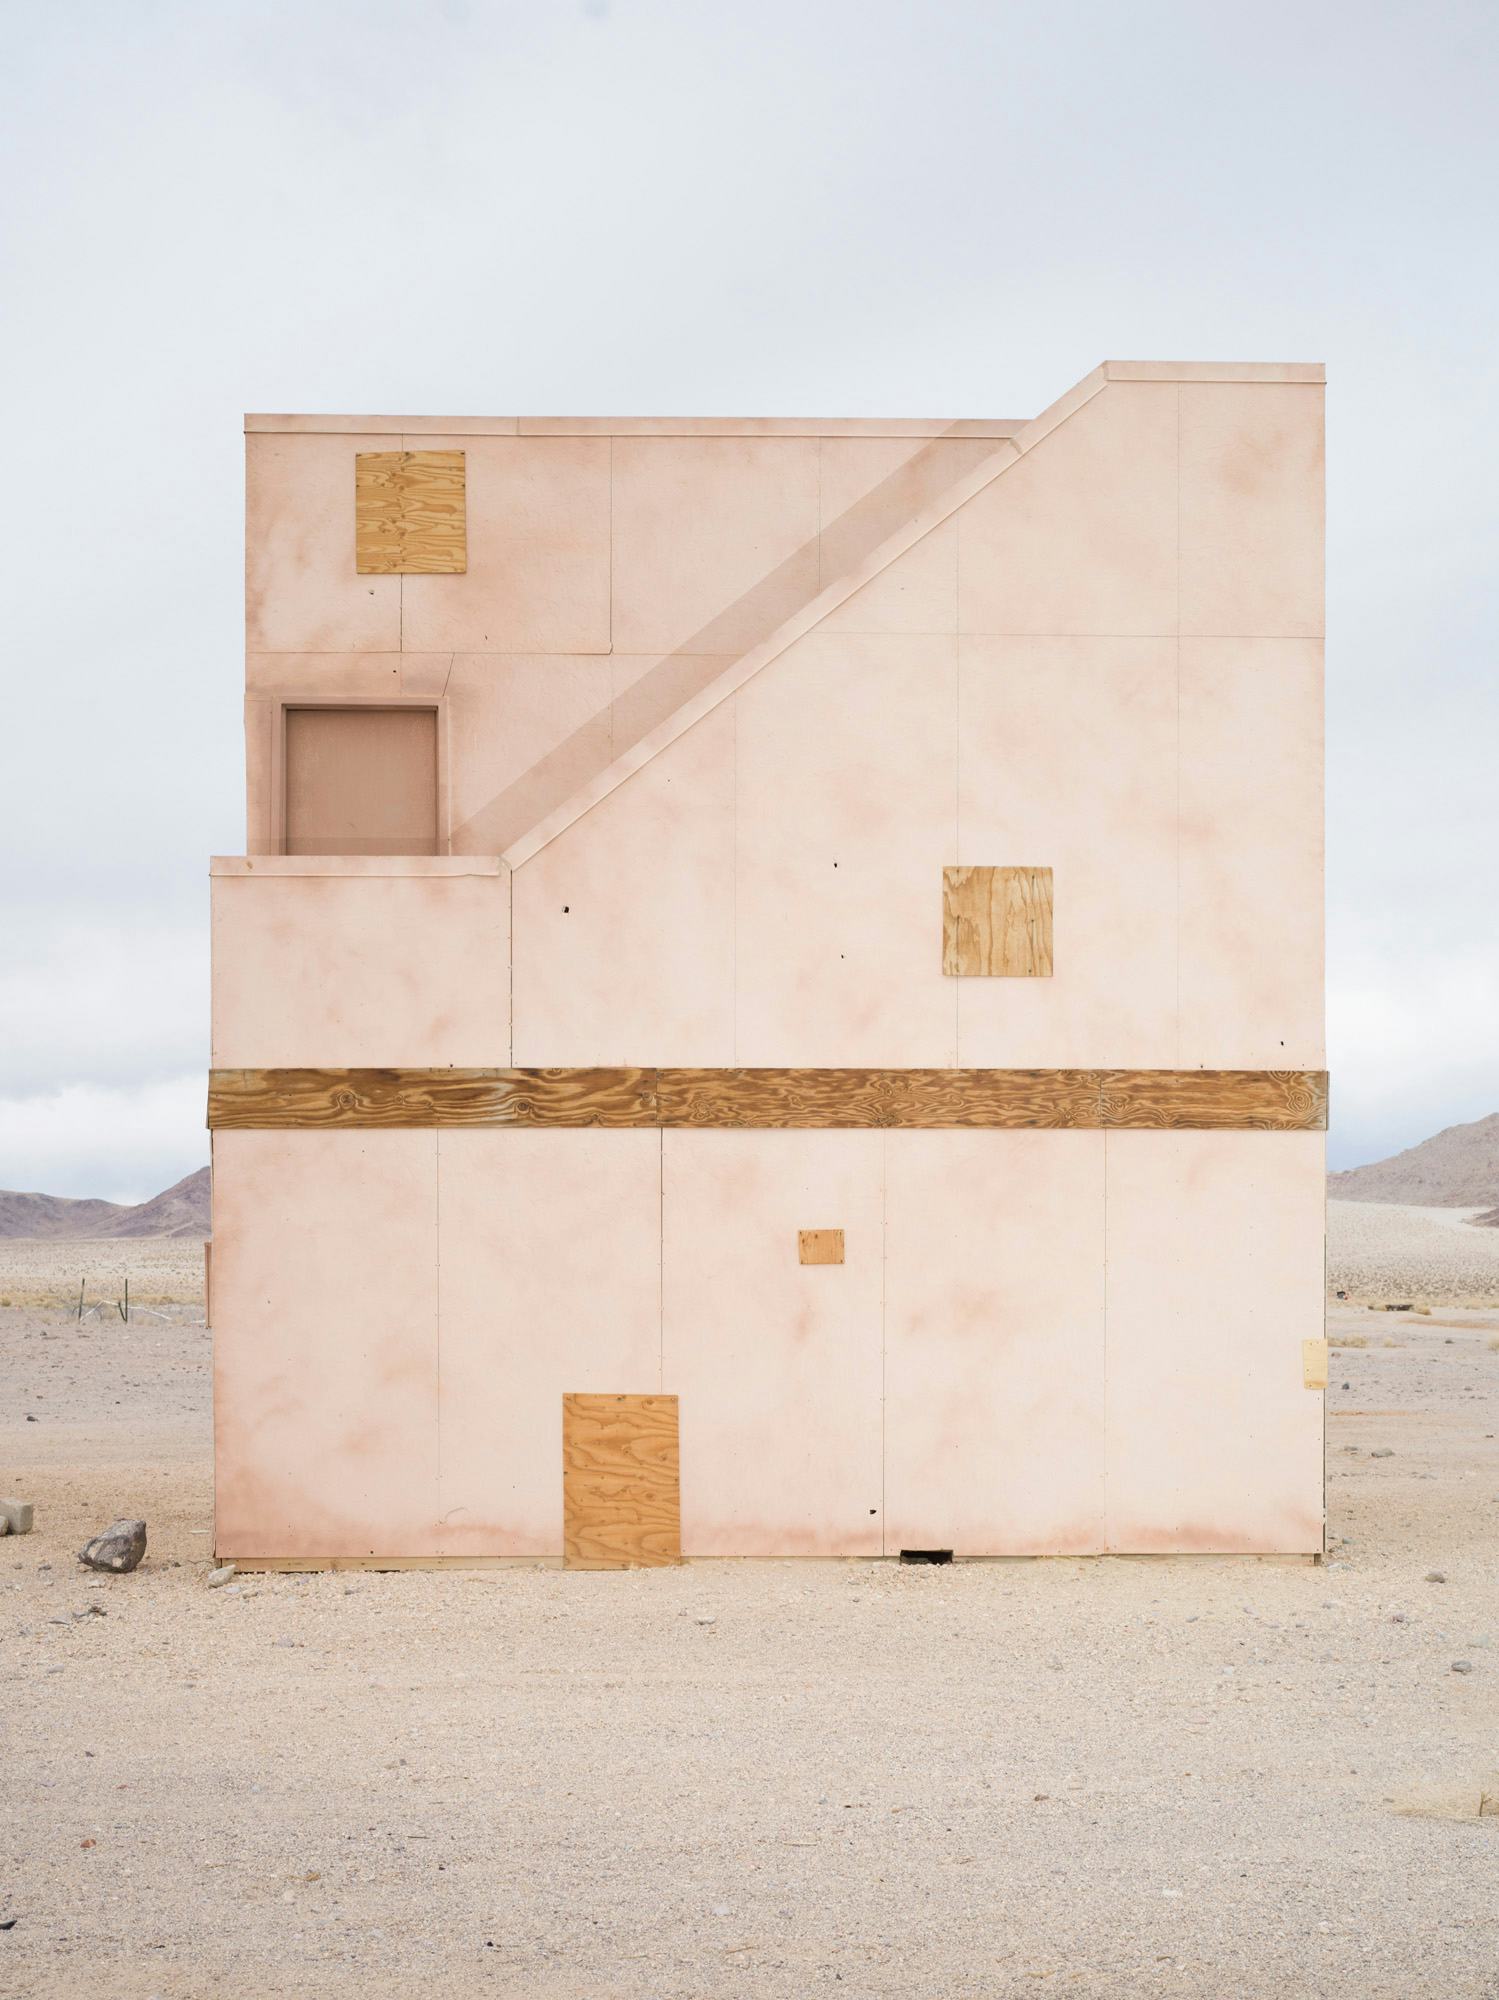 Image of a beige-coloured concrete facade of a building in a desert, with boarded windows © Andrea Orejarena & Caleb Stein